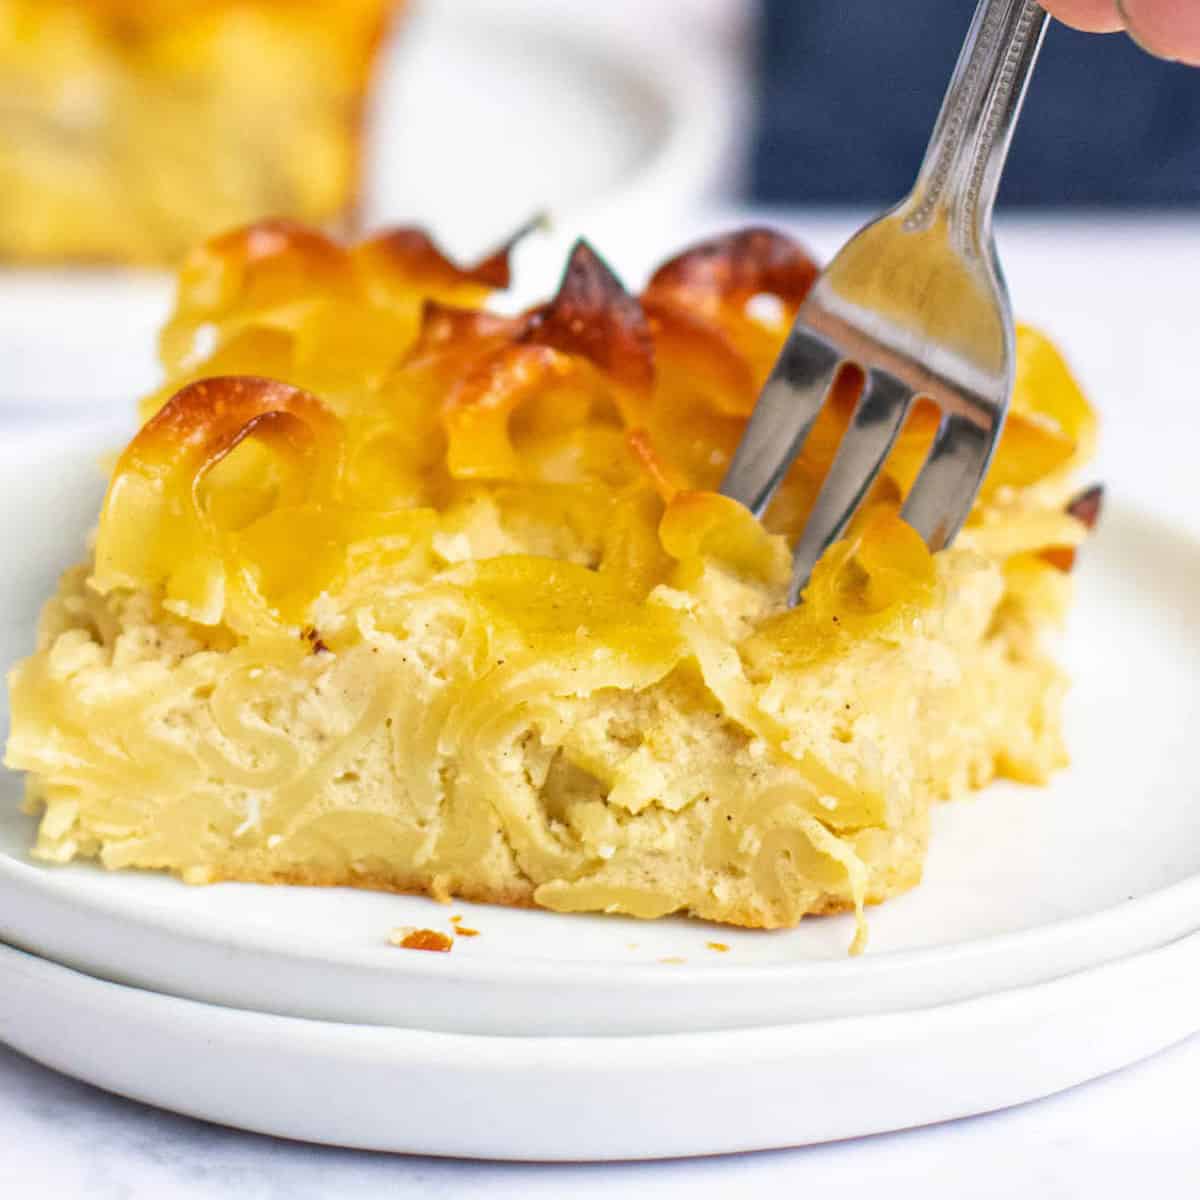 A square of noodle kugel on a plate with a fork starting to scoop a bite.